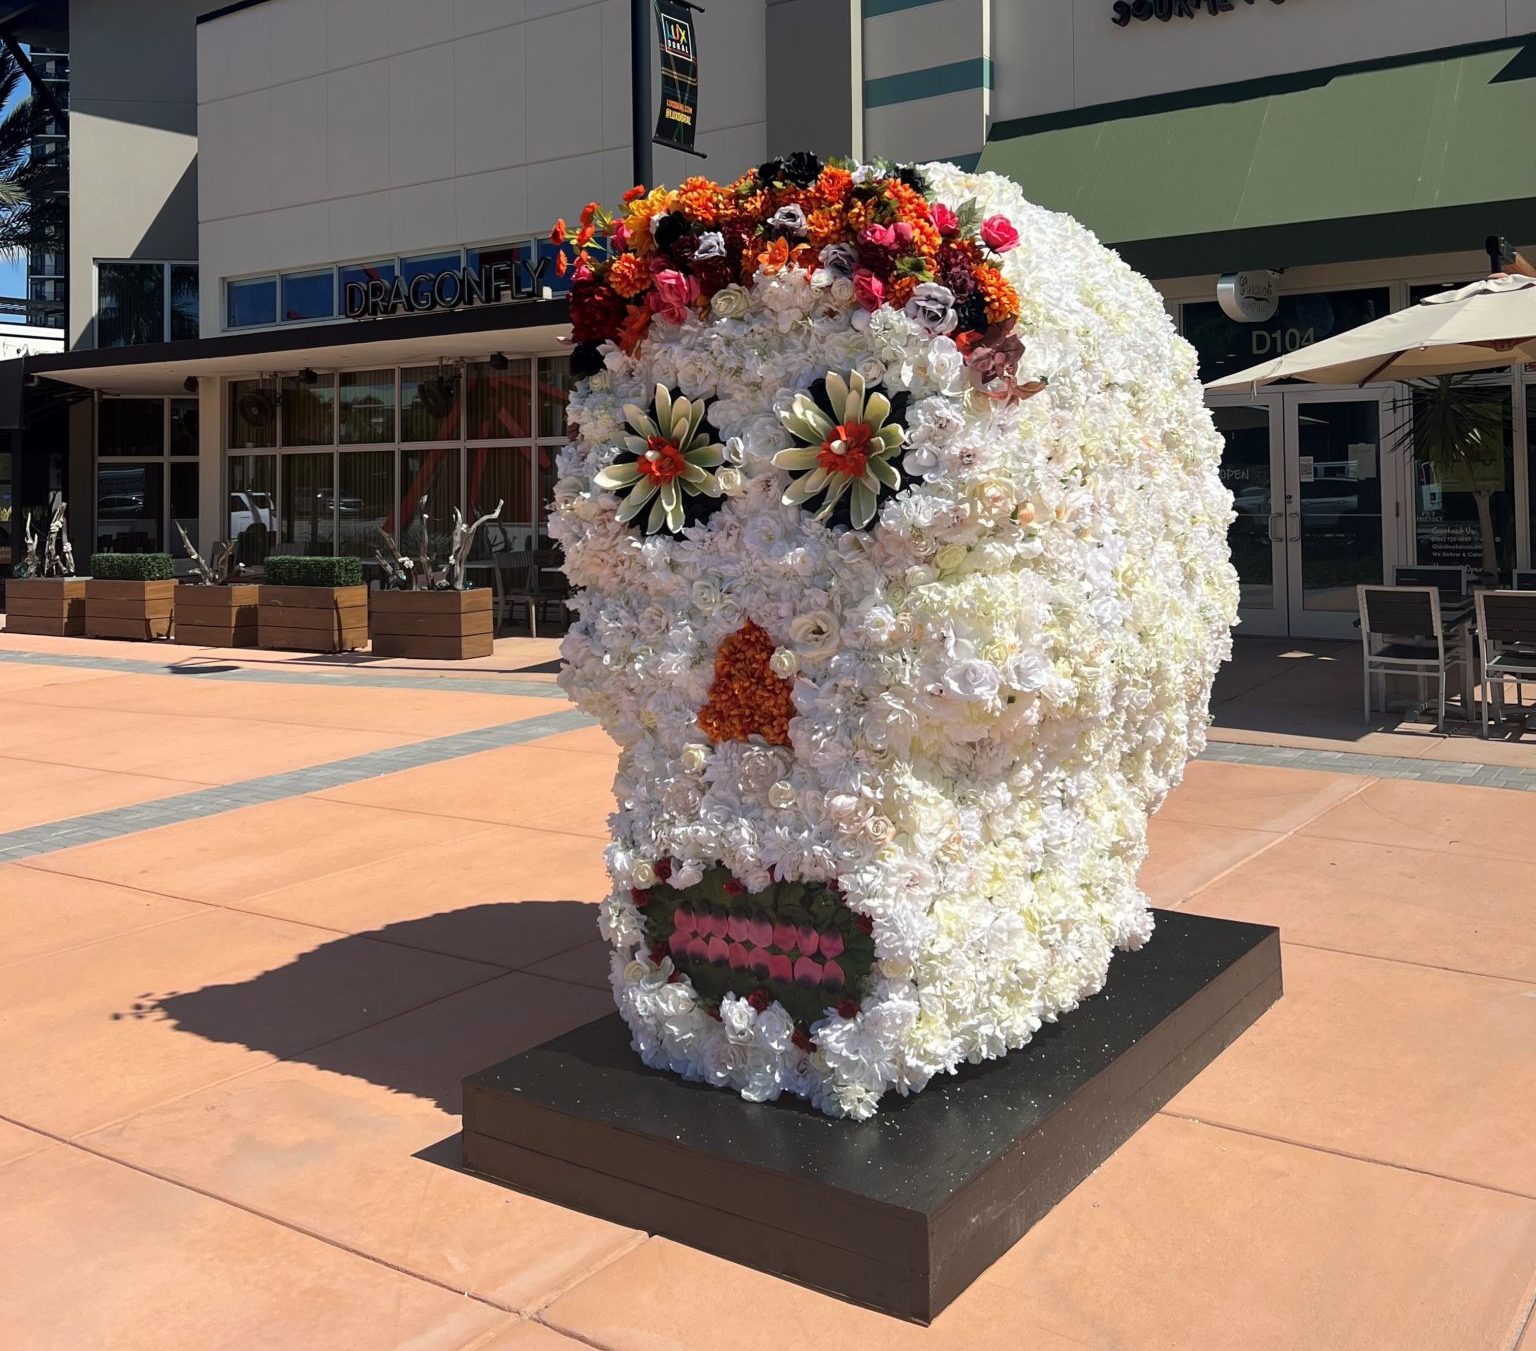 Flora, the six-foot skull made entirely of flowers, at Downtown Doral